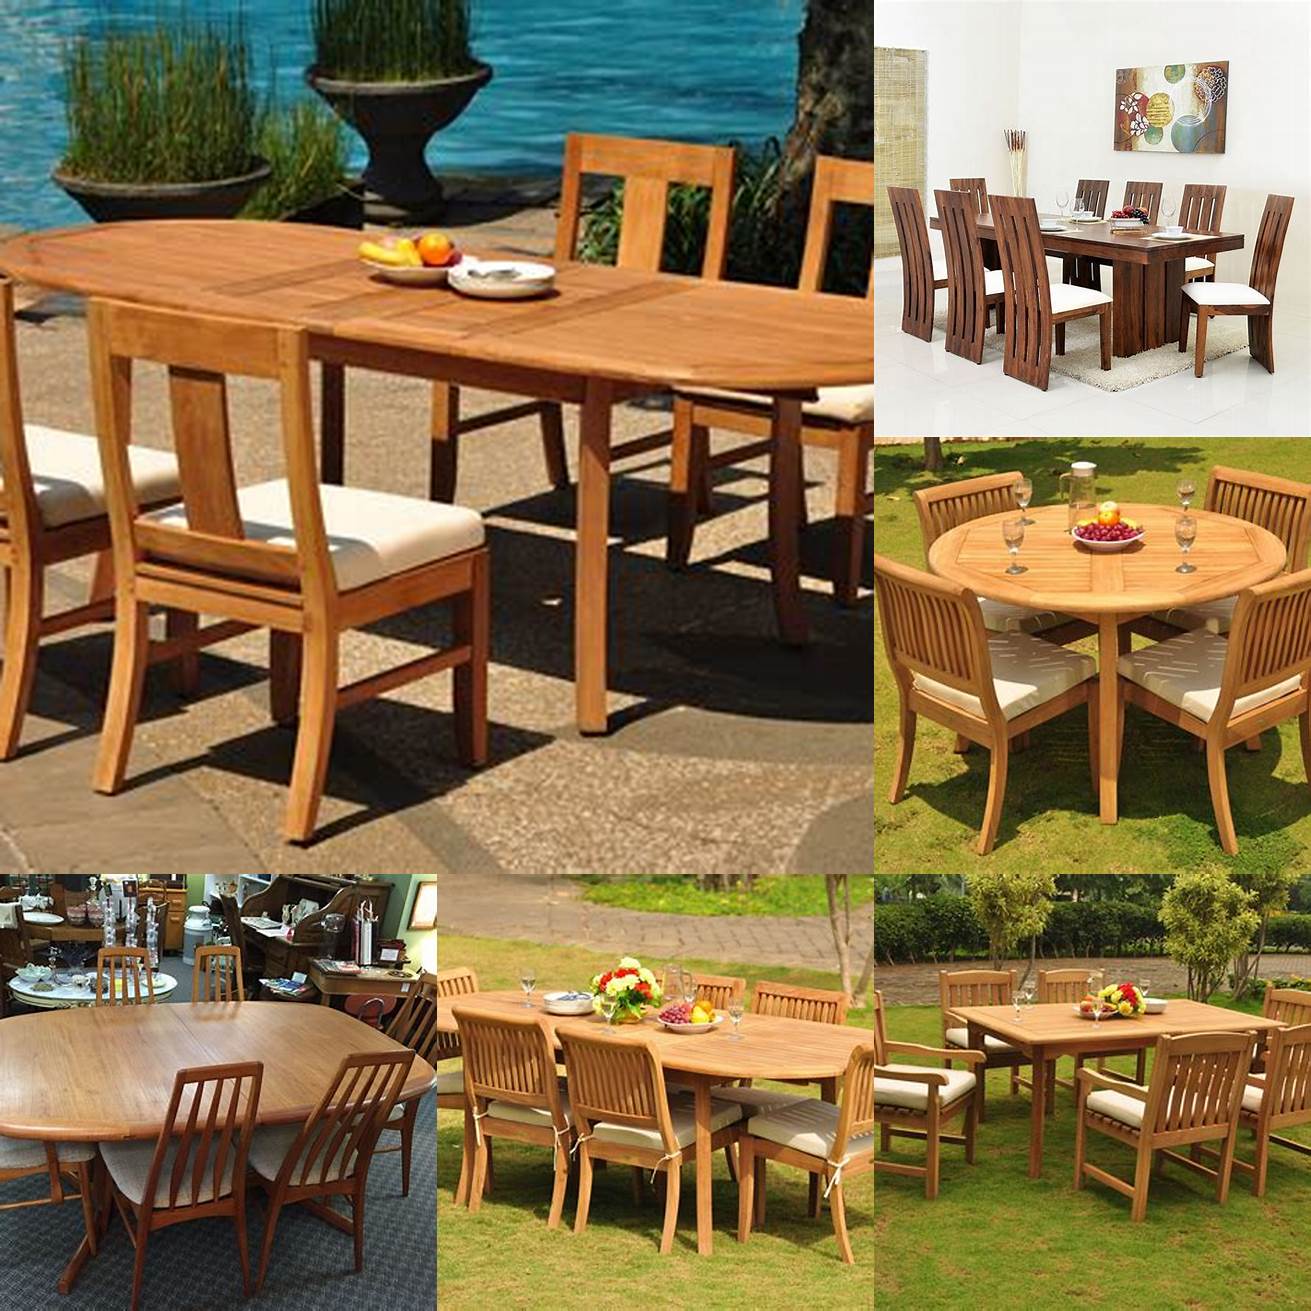 Teak dining table with matching chairs